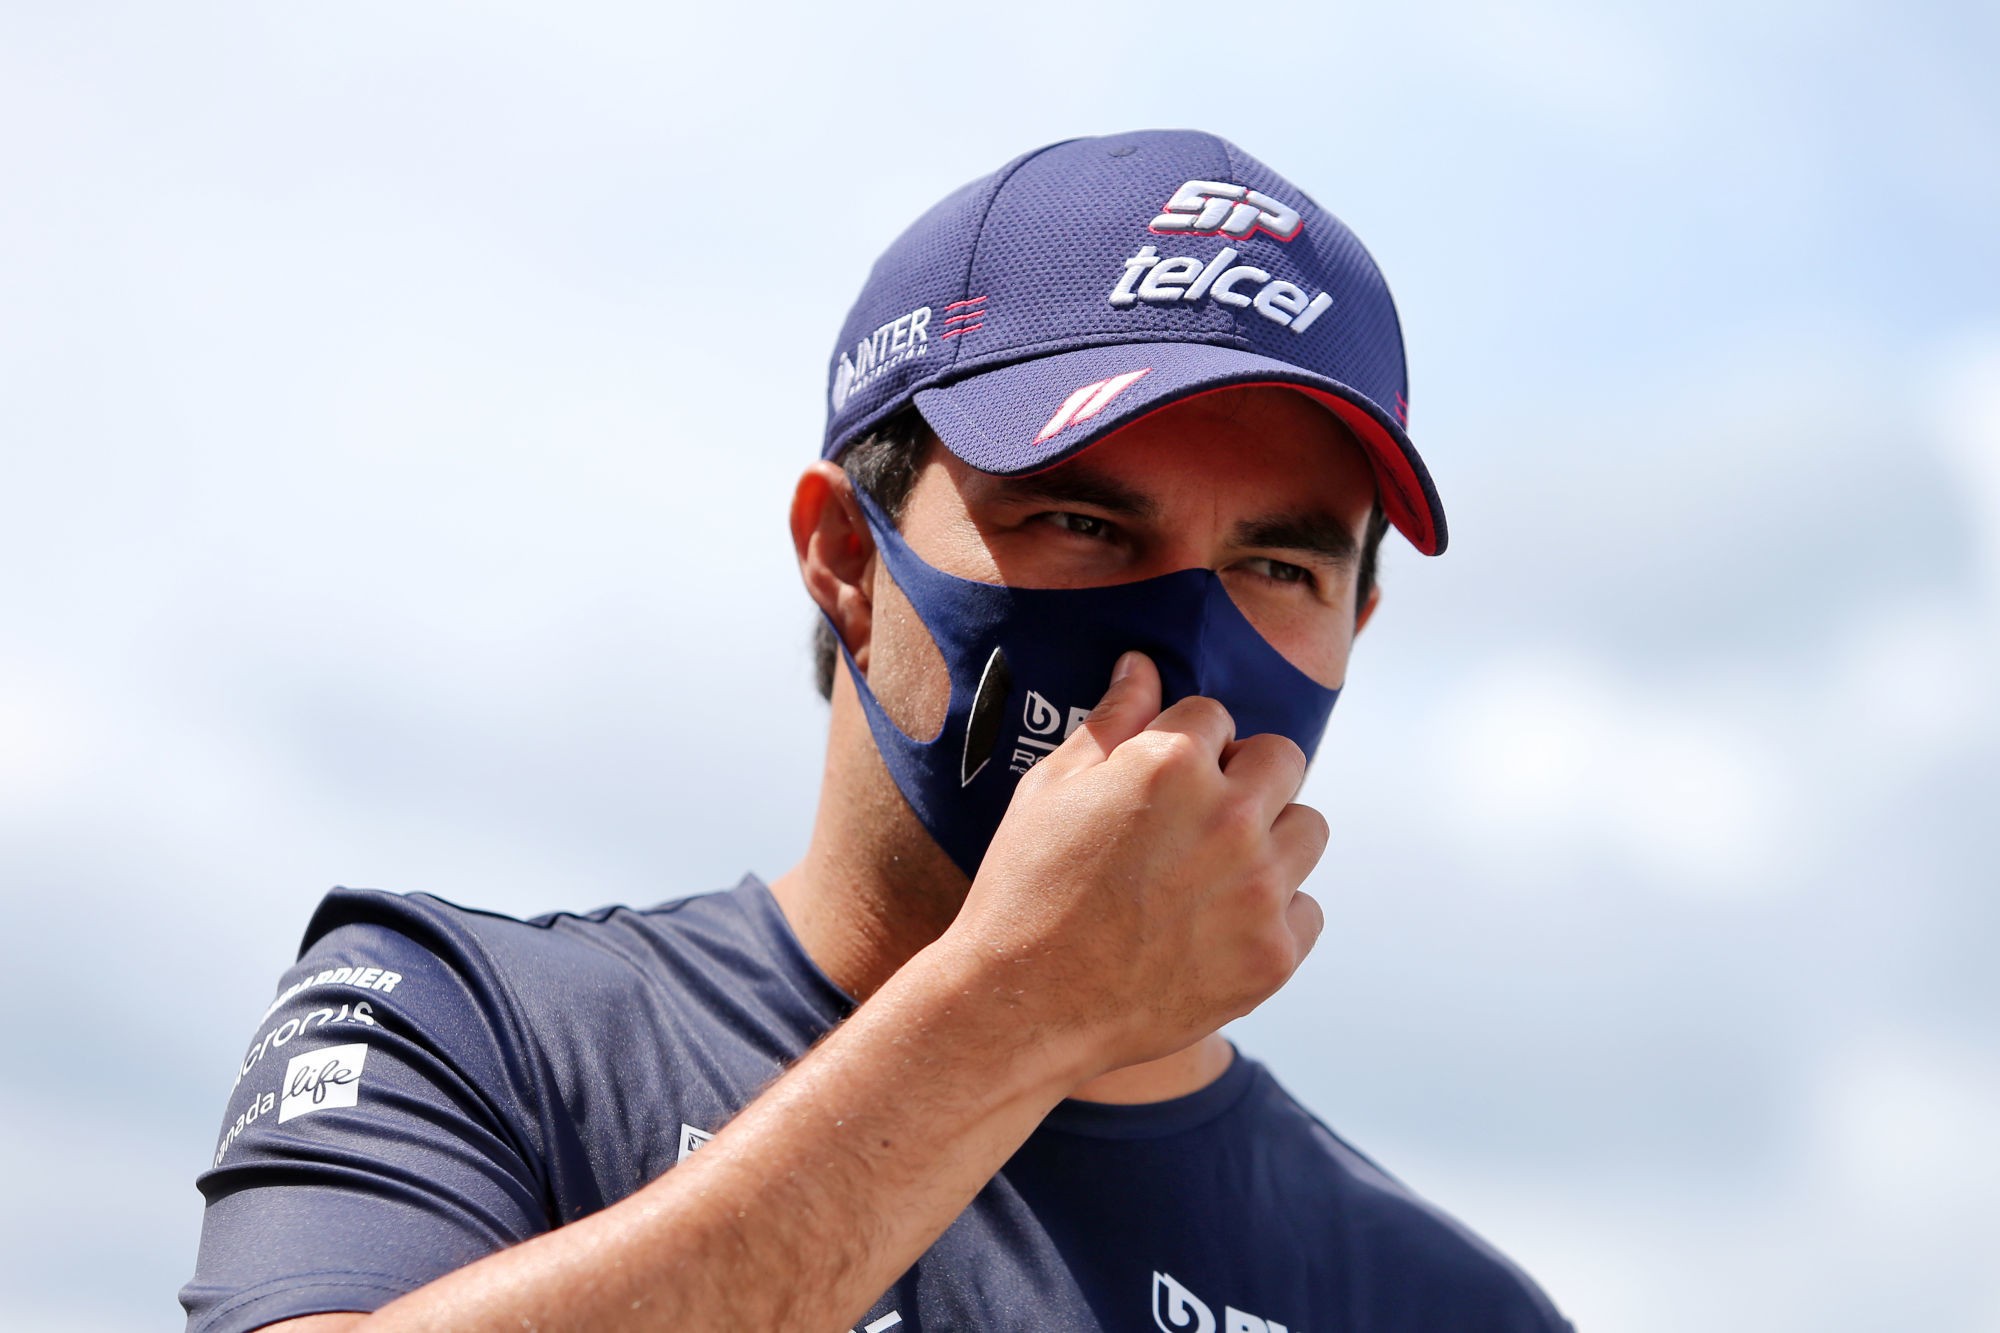 Sergio Perez (MEX) Racing Point F1 Team.
Hungarian Grand Prix, Thursday 16th July 2020. Budapest, Hungary. 
By Icon Sport